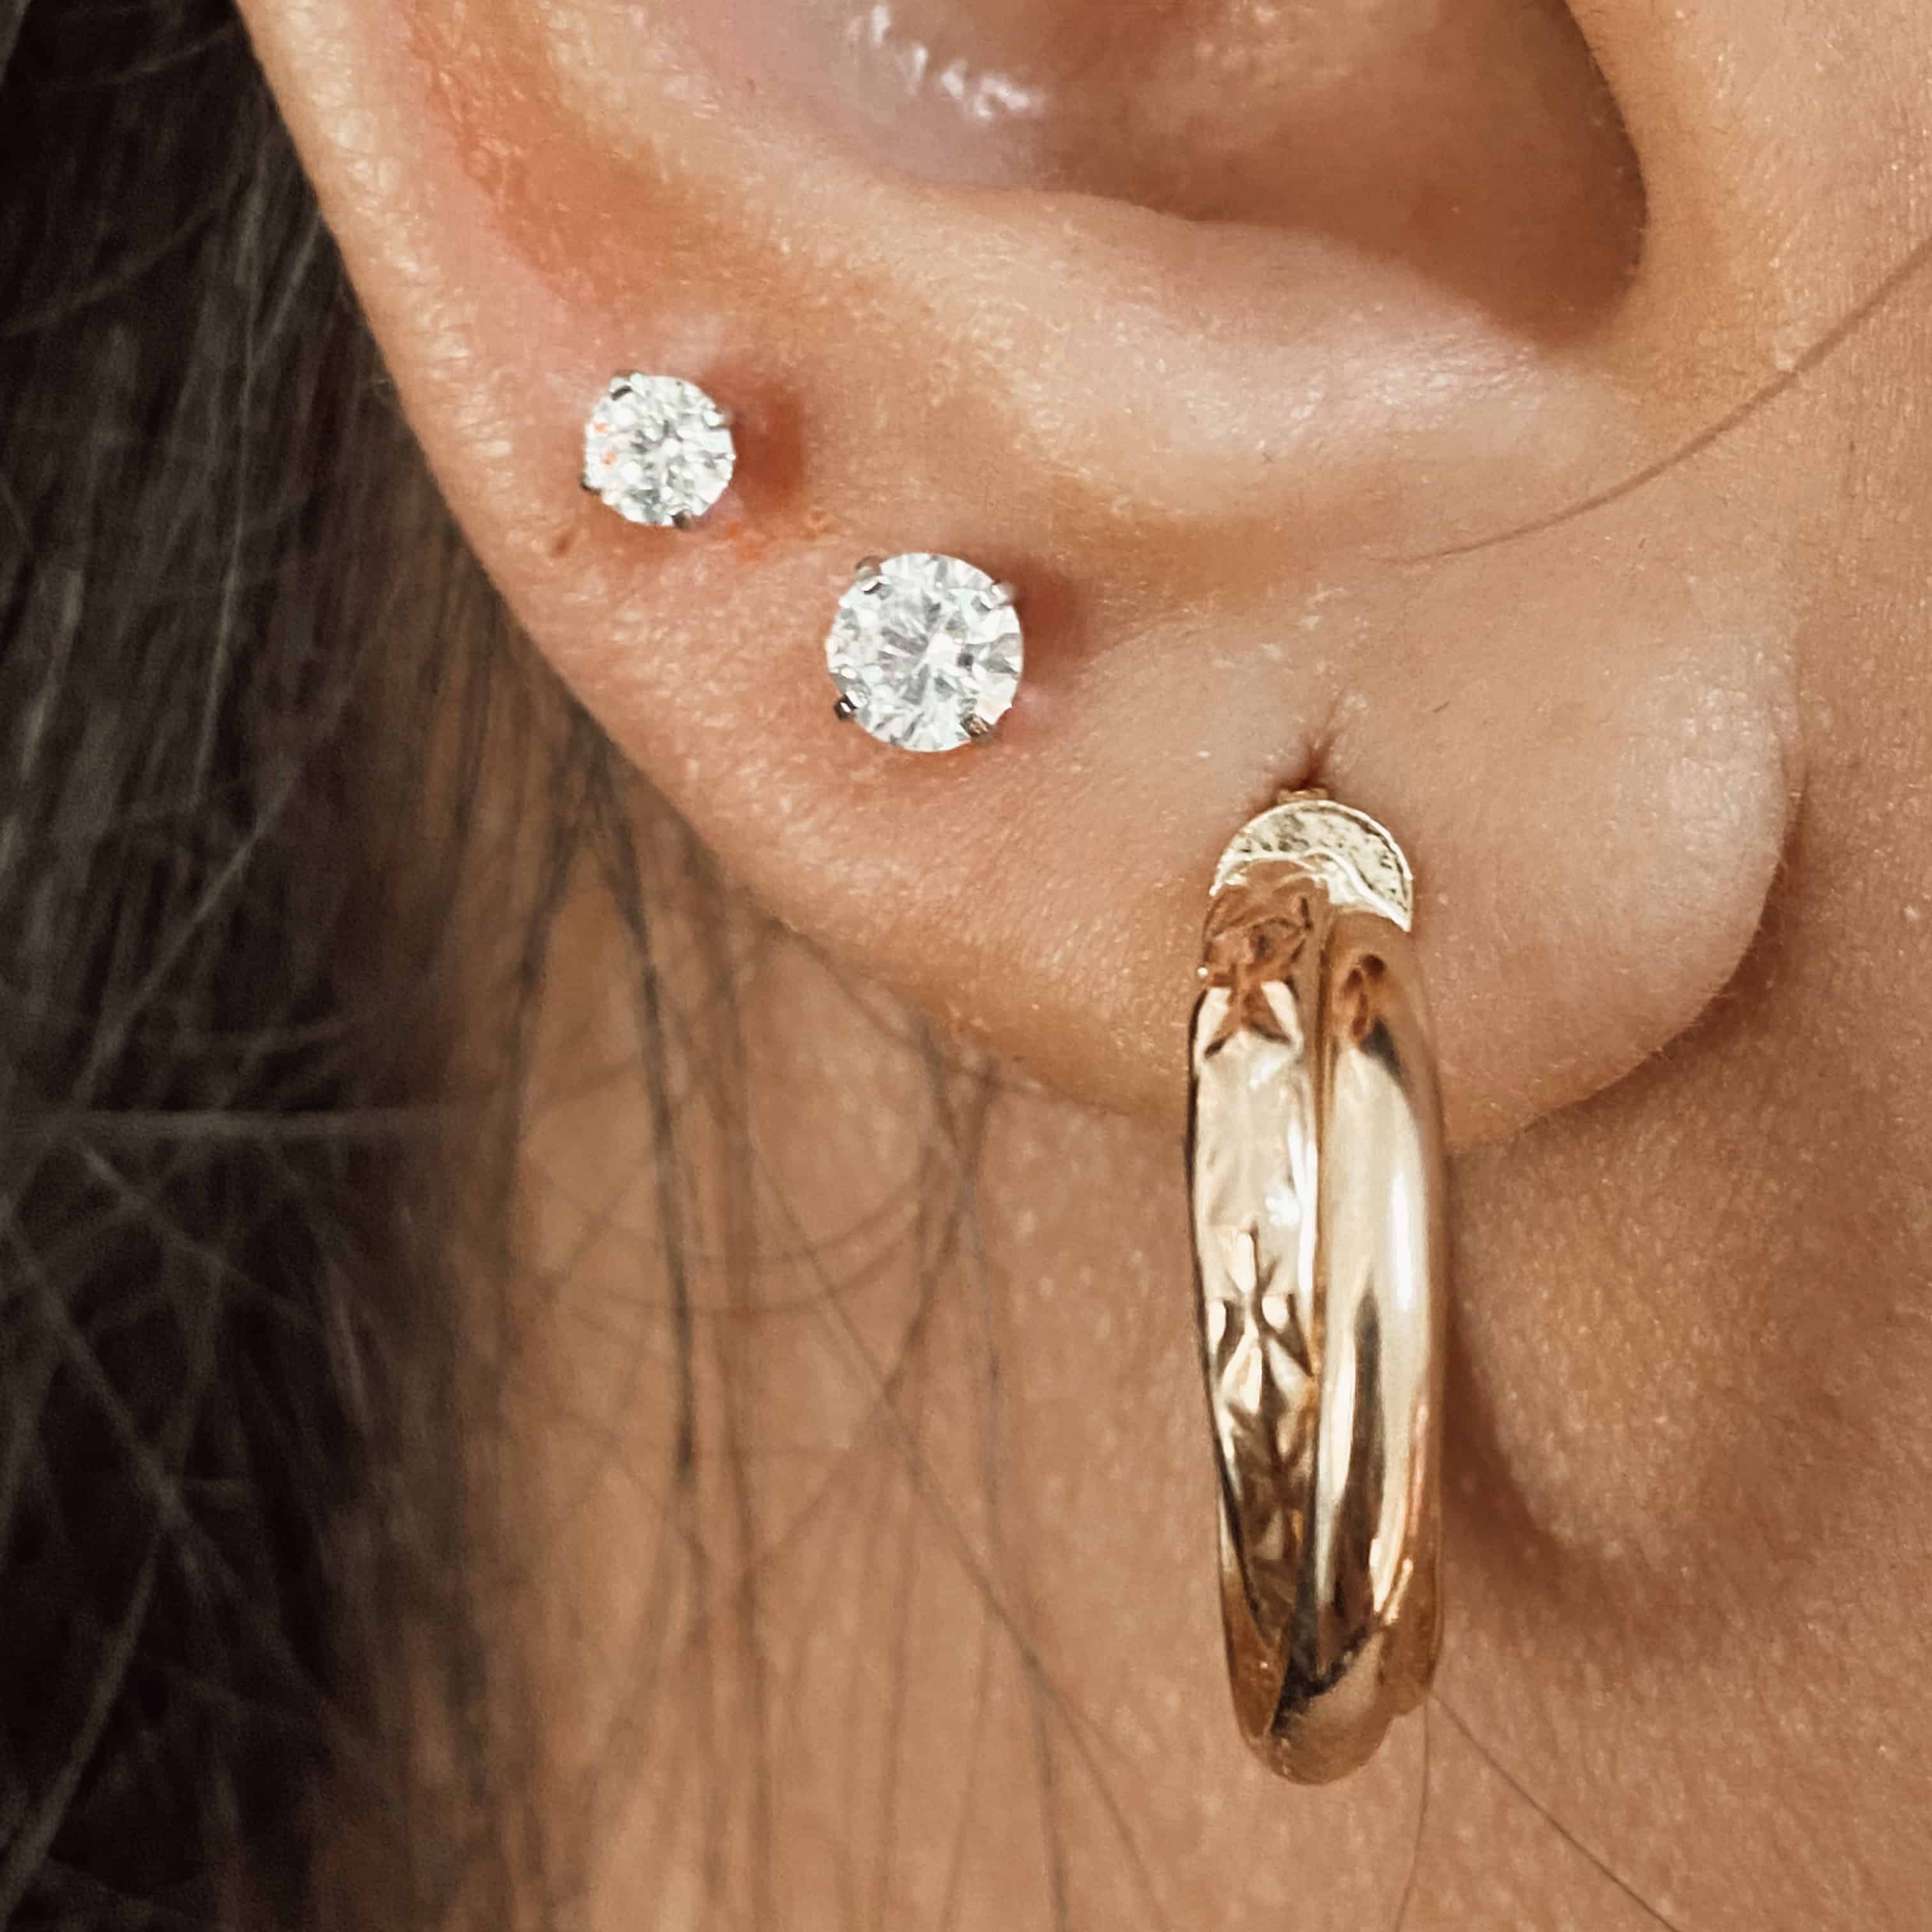 lobe piercing jewelry collection